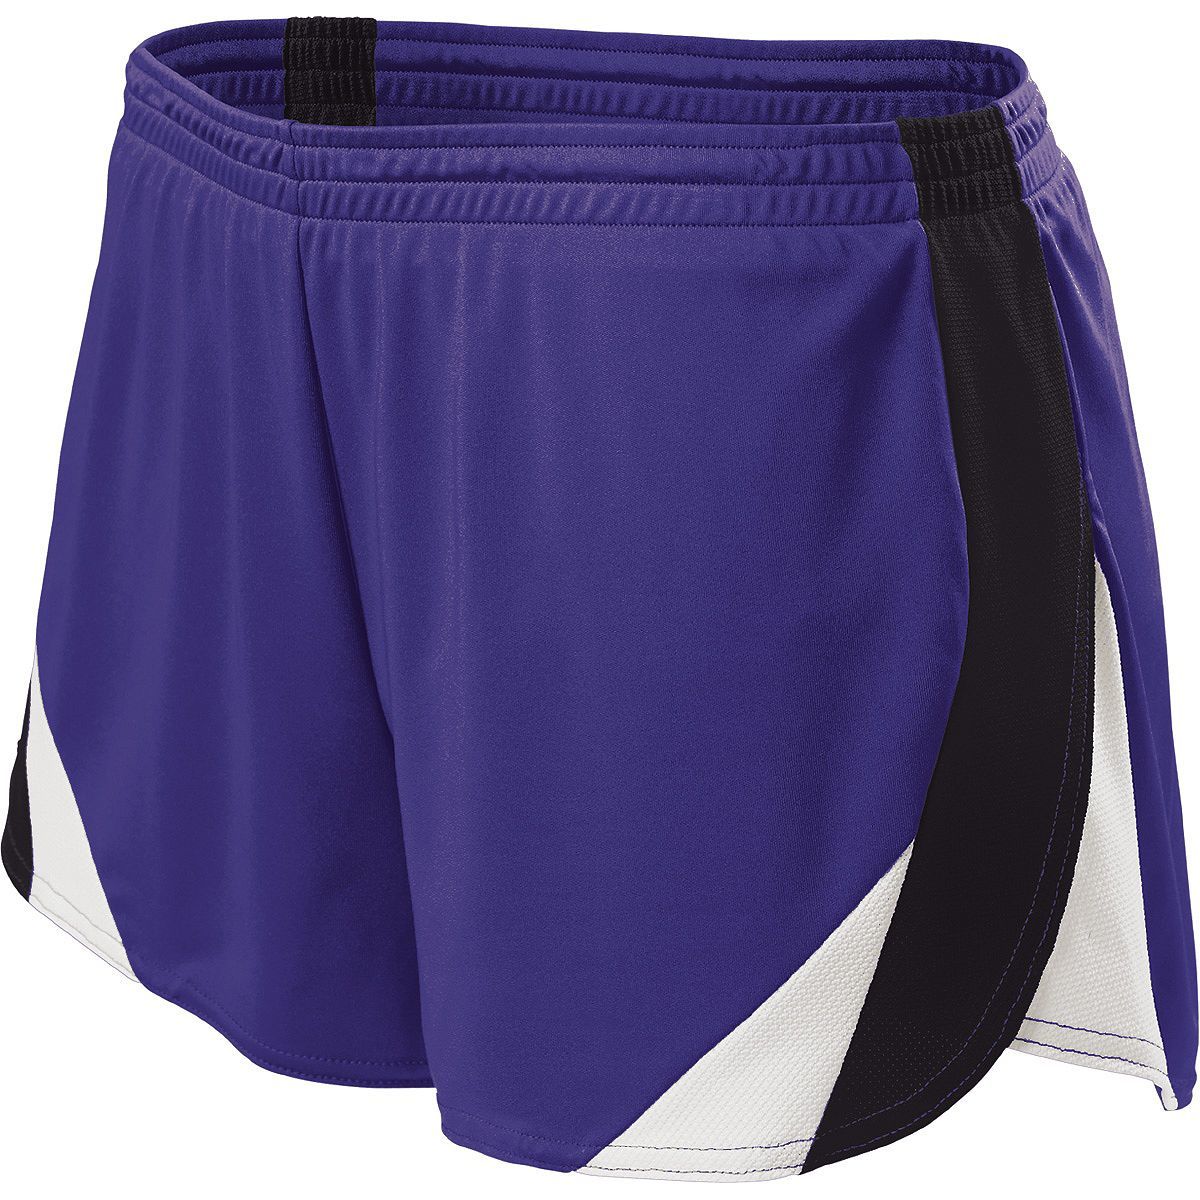 Holloway Ladies Approach Shorts in Purple/Black/White  -Part of the Ladies, Ladies-Shorts, Track-Field, Holloway product lines at KanaleyCreations.com